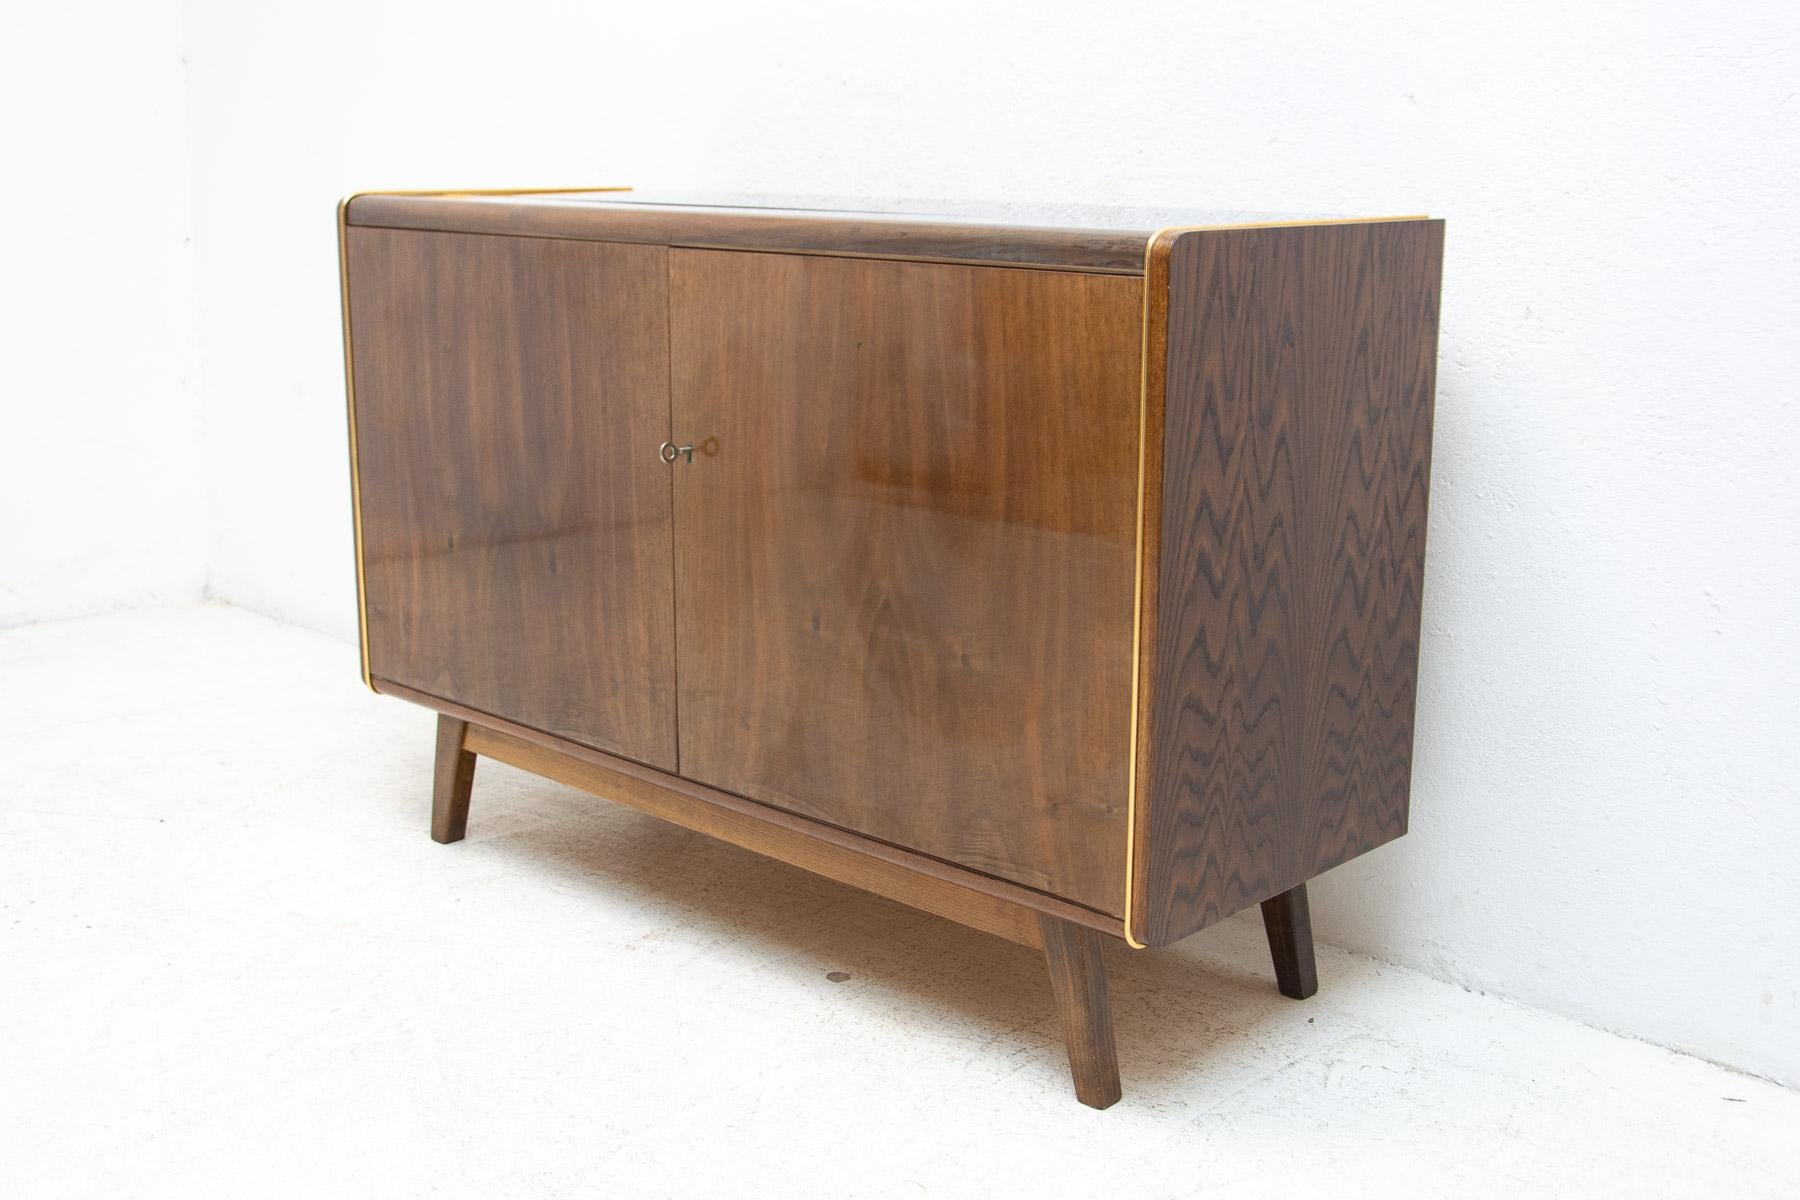 This mid-century sideboard was designed by Hubert Nepožitek & Bohumil Landsman for Jitona company in the 1960´s. Beautiful walnut veneer. Material: walnut, mahogany, plywood, opaxite glass on the top. In very good condition.

Height: 78